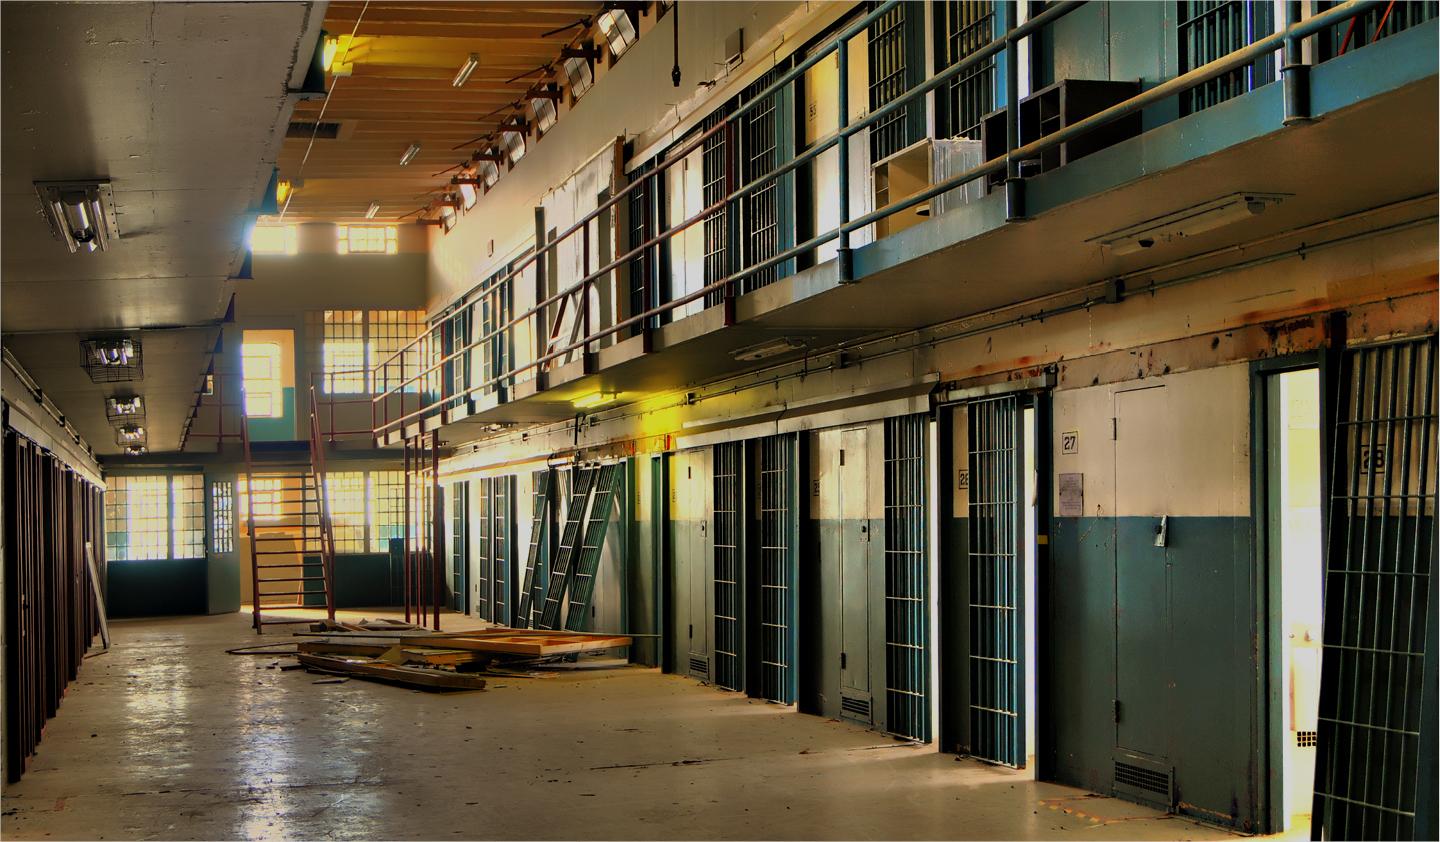 Interior of disused prison with sunlight hitting empty cellblock